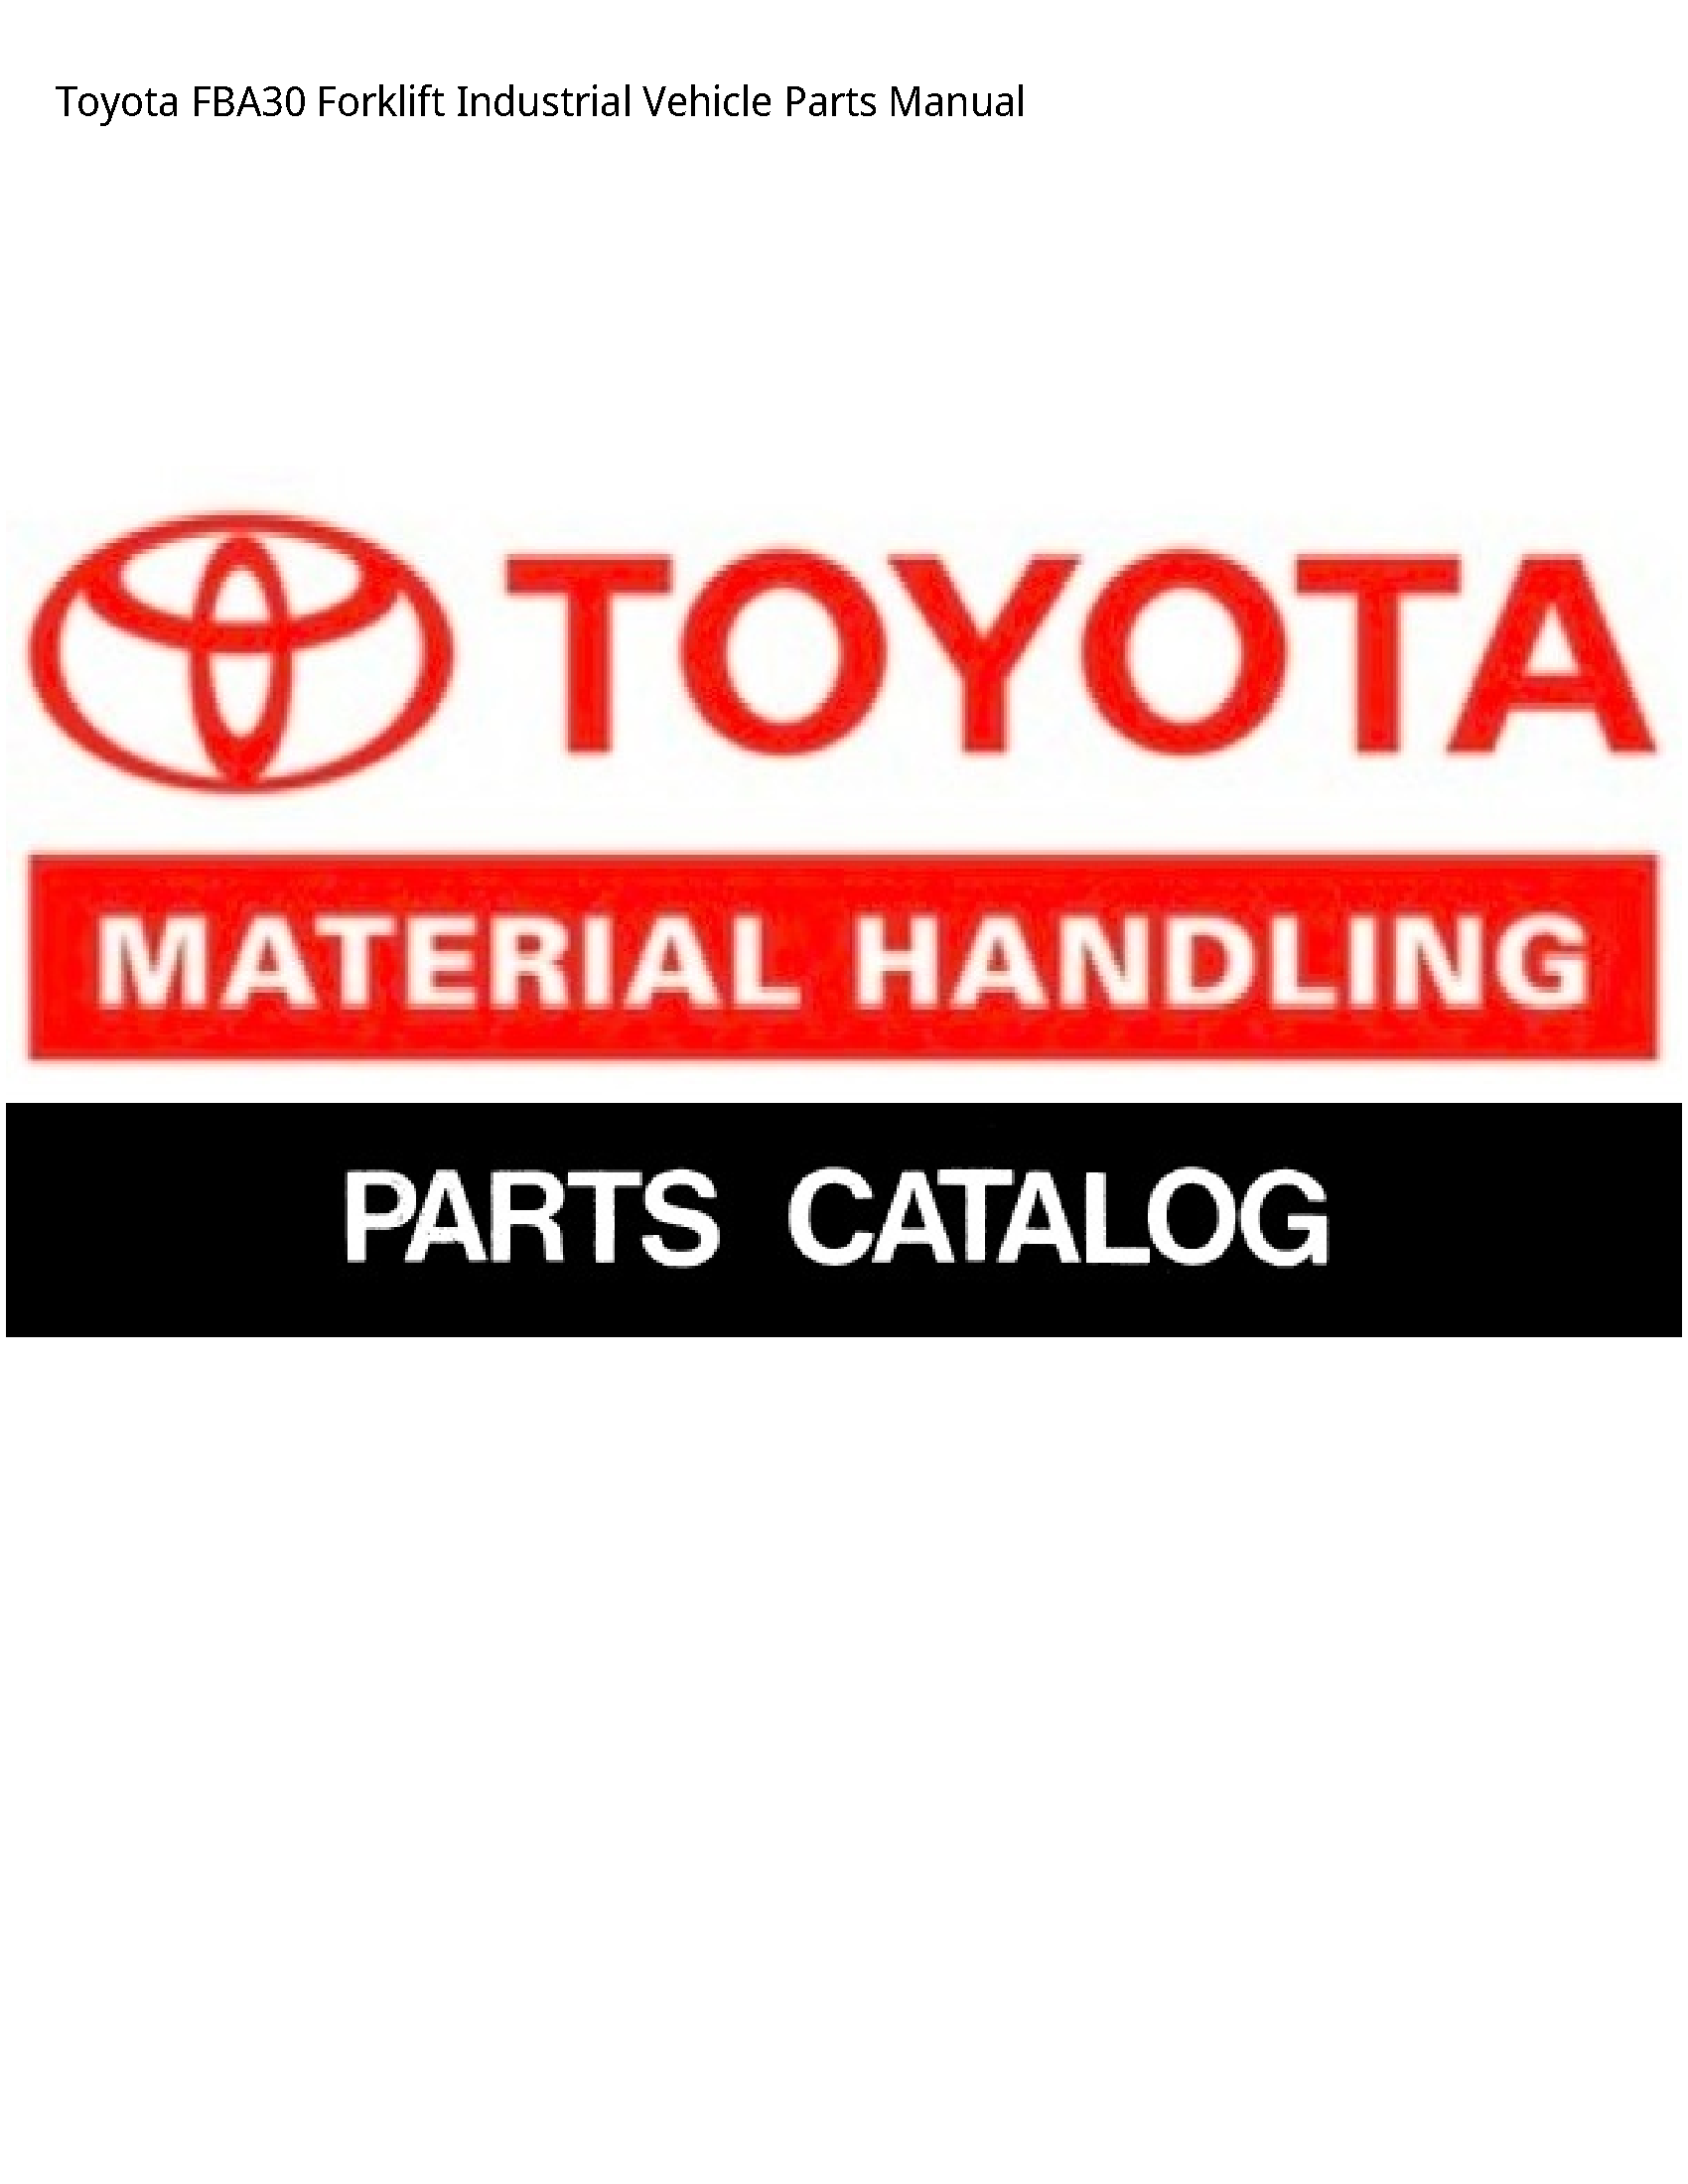 Toyota FBA30 Forklift Industrial Vehicle Parts manual